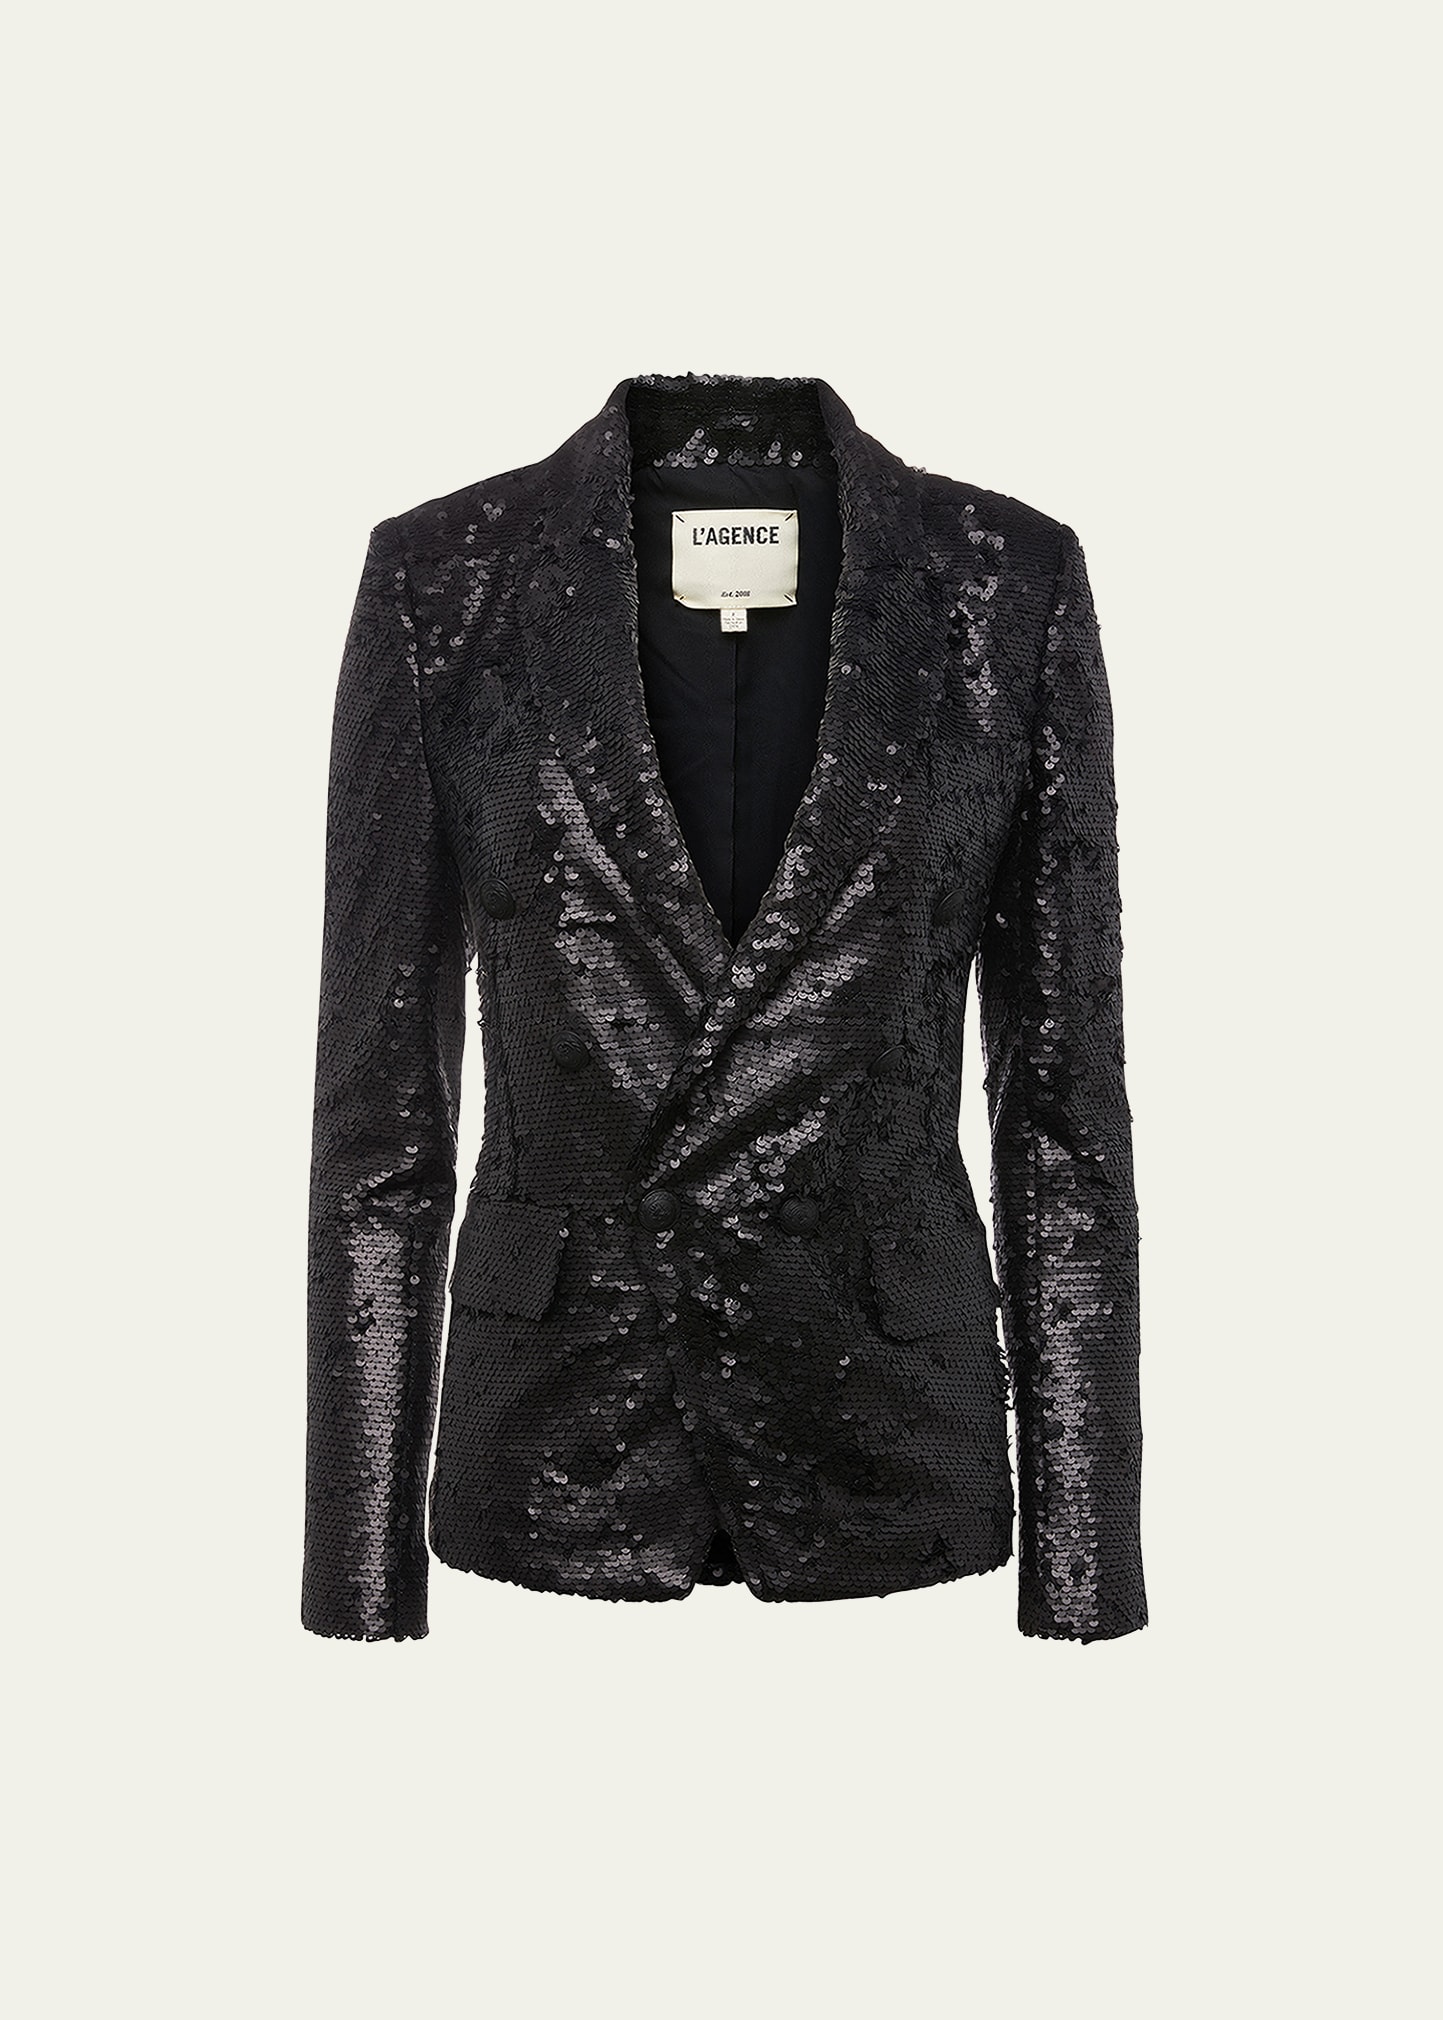 L'Agence Kenzie Sequined Double-Breasted Blazer